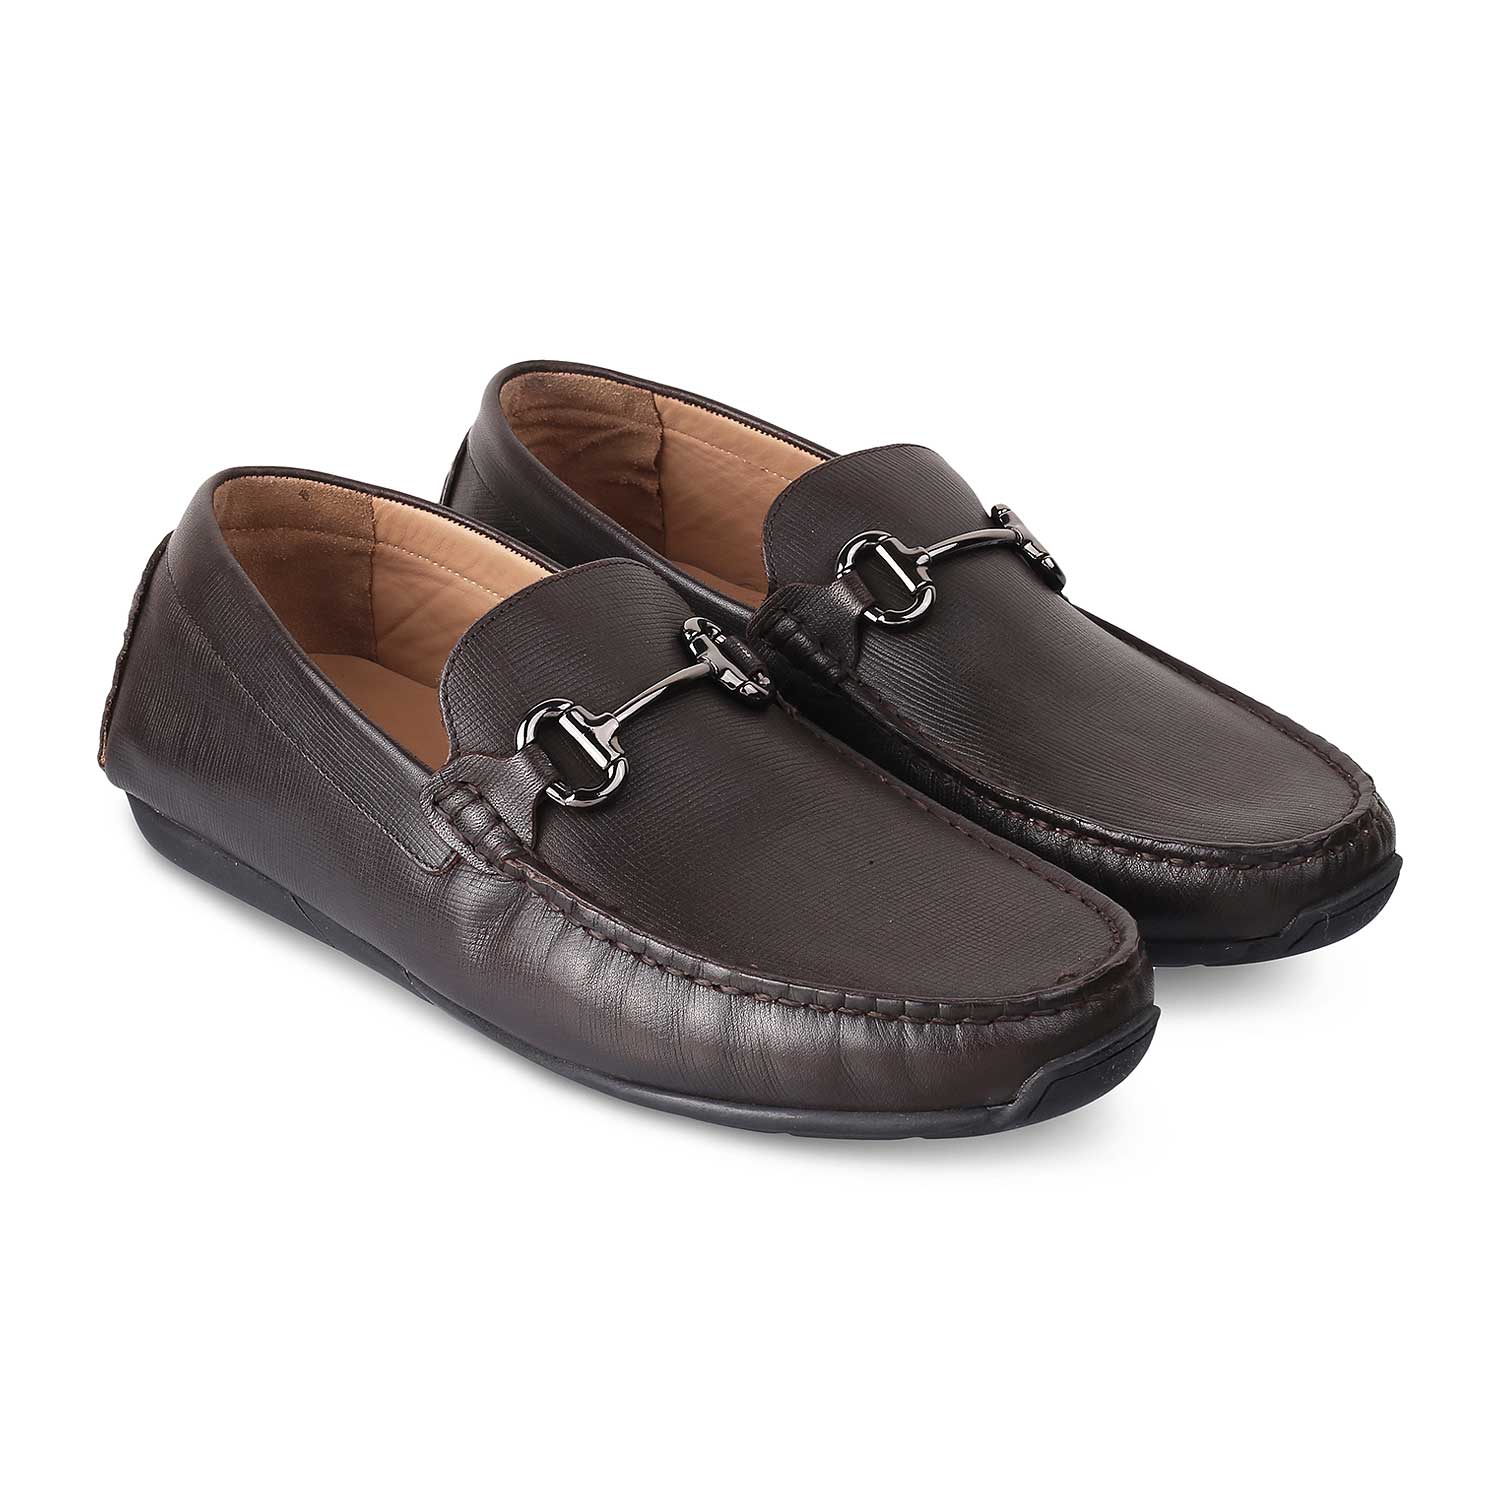 Namshi Brown Leather Driving Loafers for Men Online at Tresmode